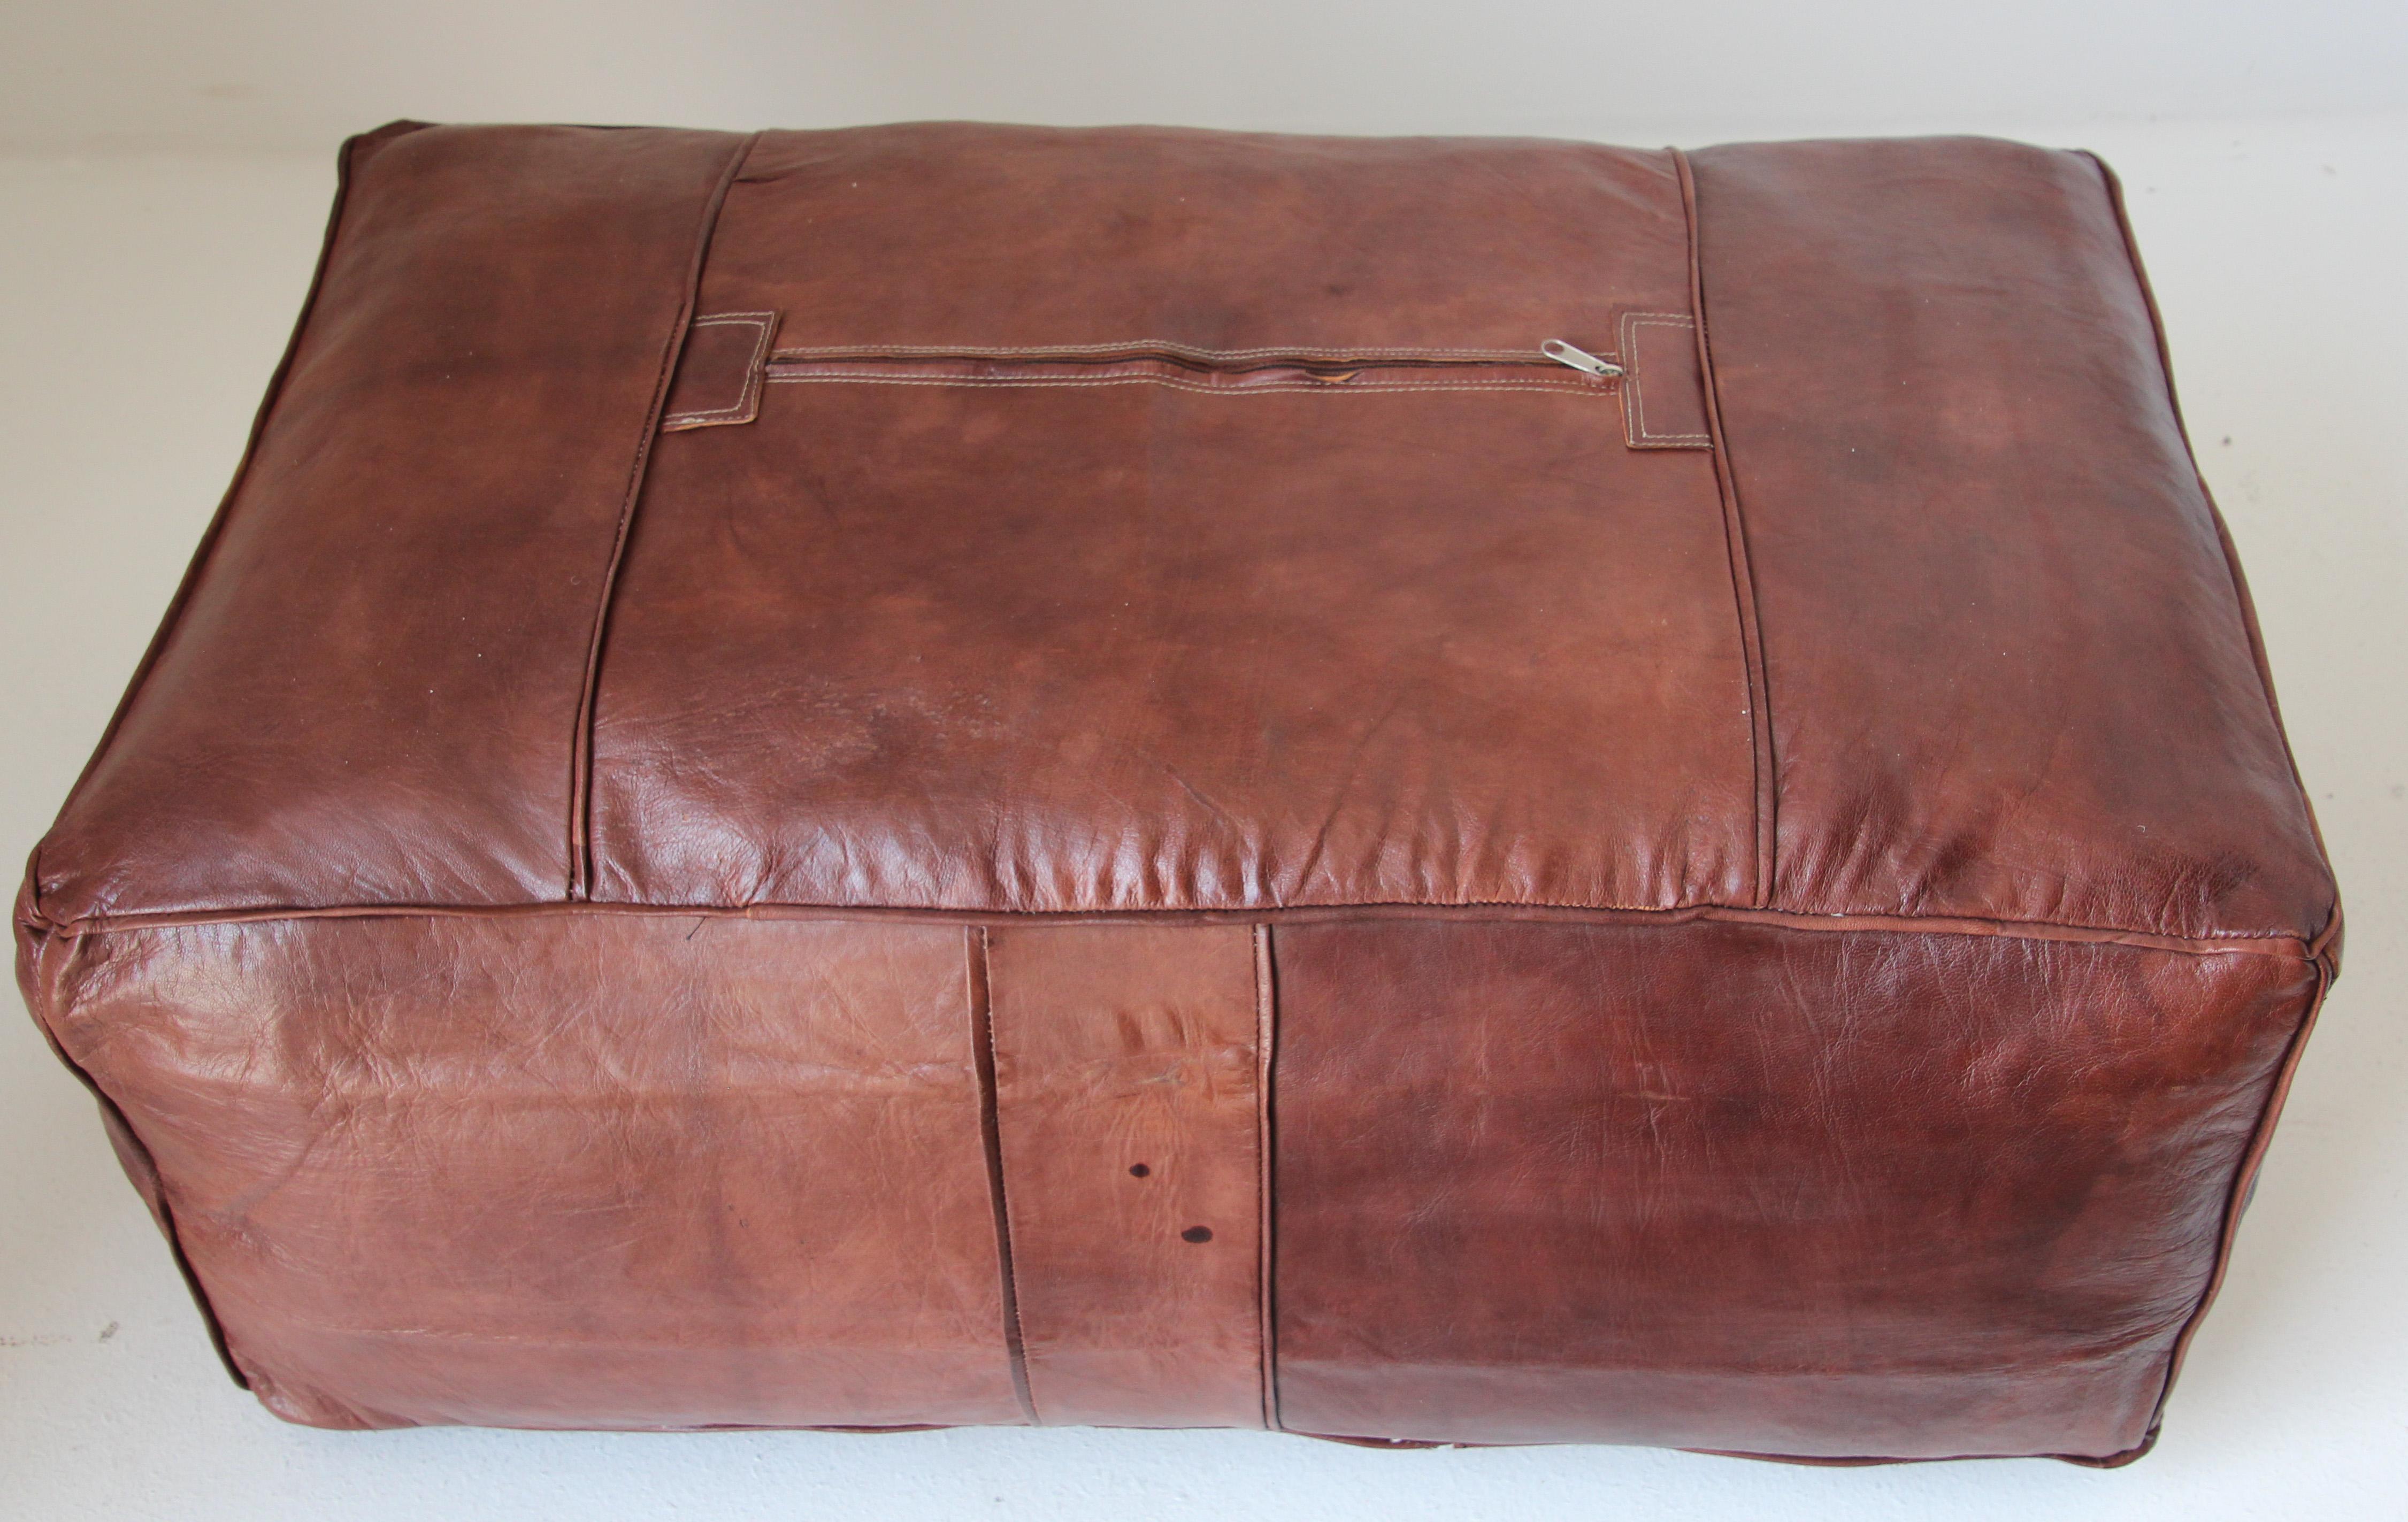 Hand-Crafted Large Moroccan Brown Leather Rectangular Pouf Ottoman